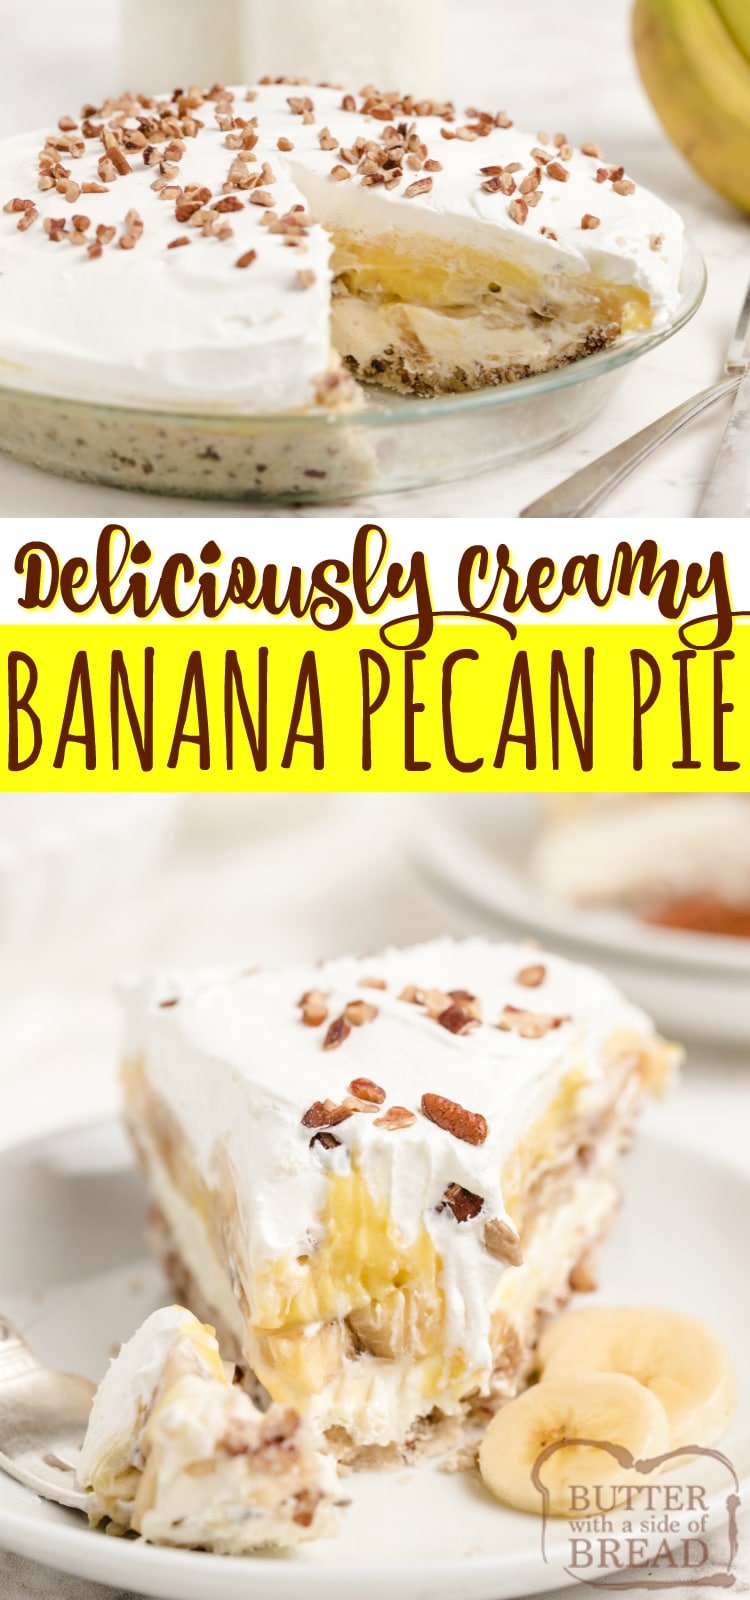 Creamy Banana Pecan Pie combines two classic pies into one delicious dessert! This simple banana pie recipe is made in a pecan crust, with fresh bananas sandwiched between two creamy layers.